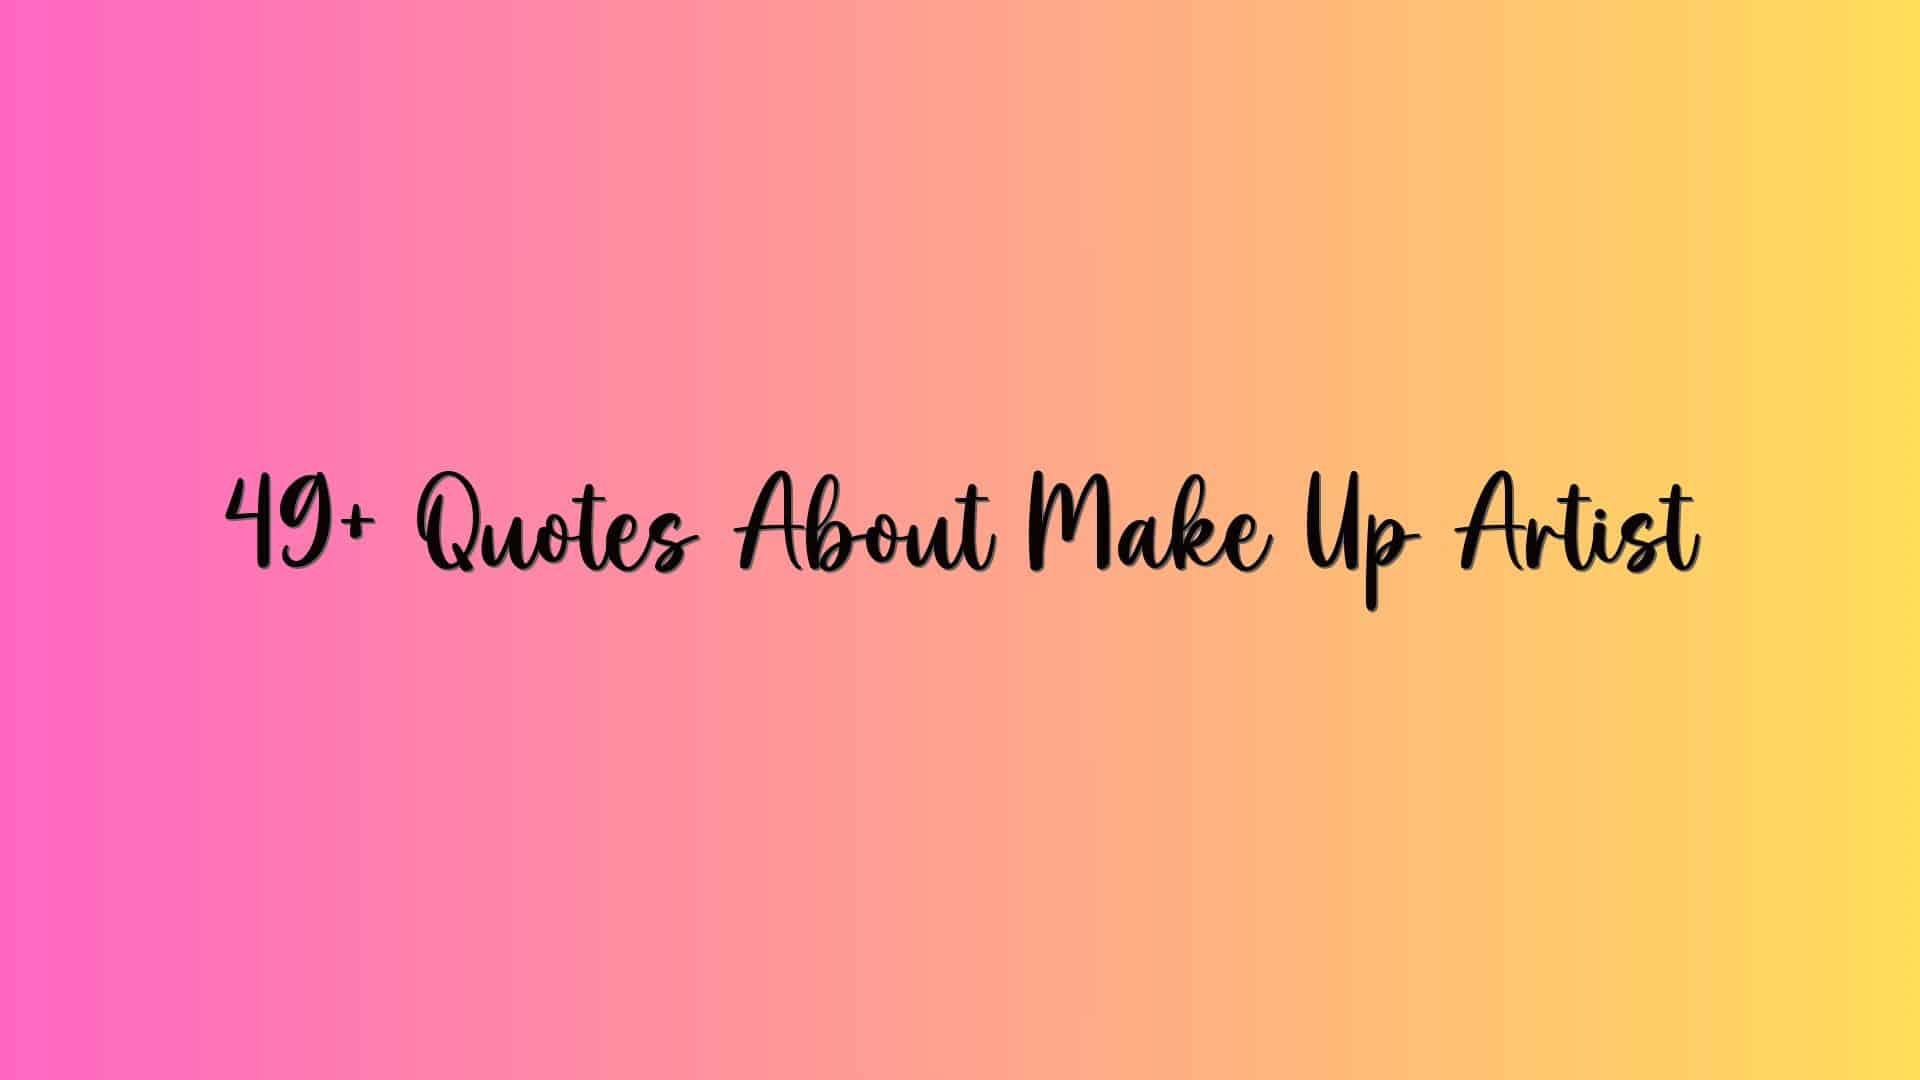 49+ Quotes About Make Up Artist